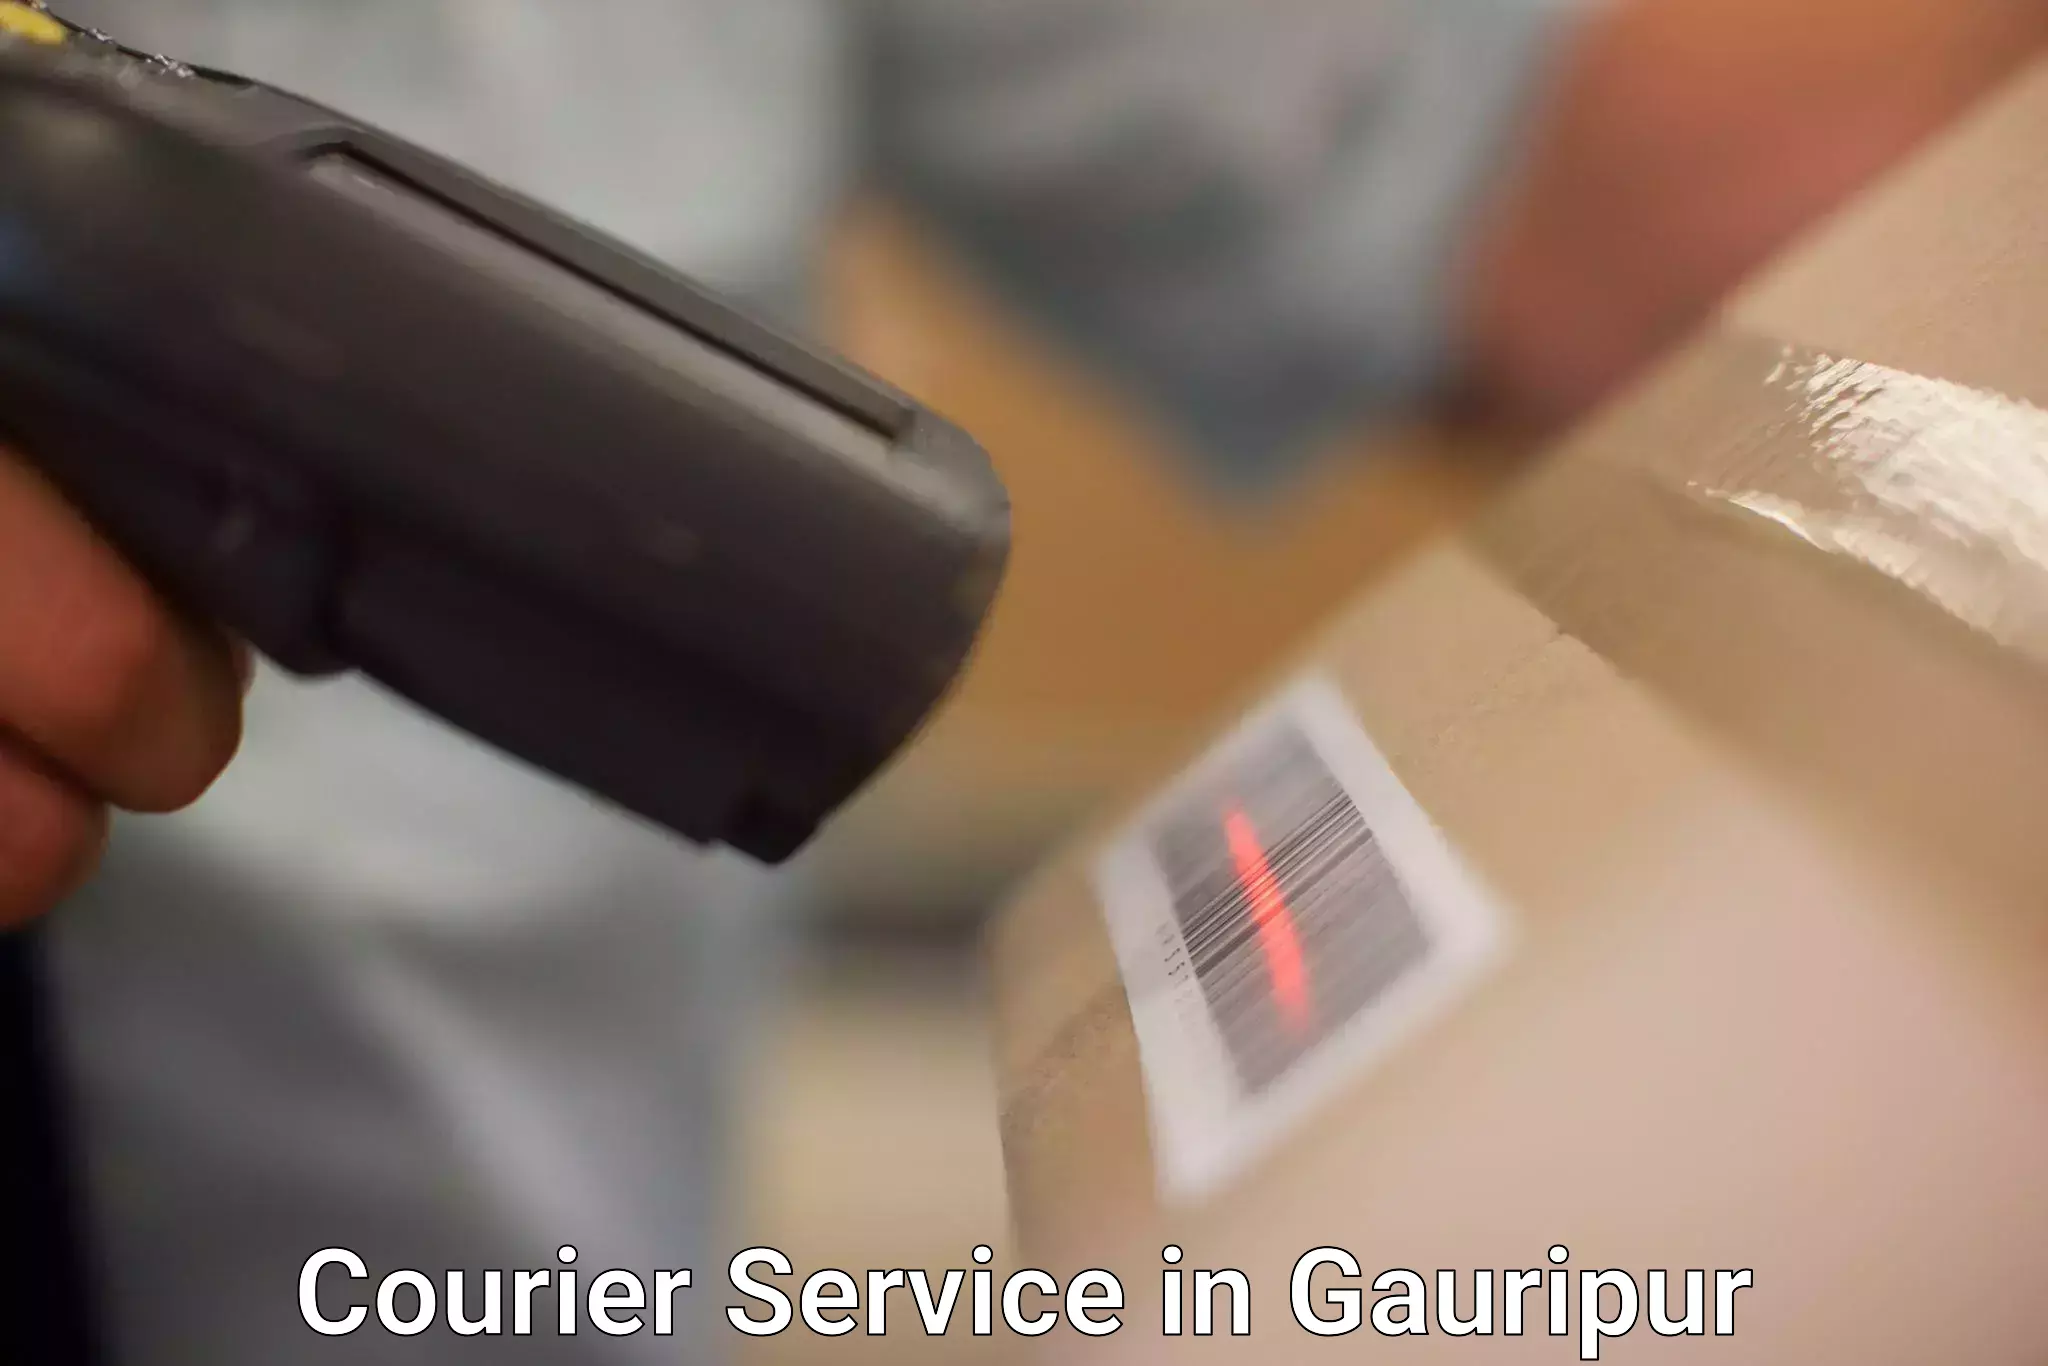 Customizable shipping options in Gauripur